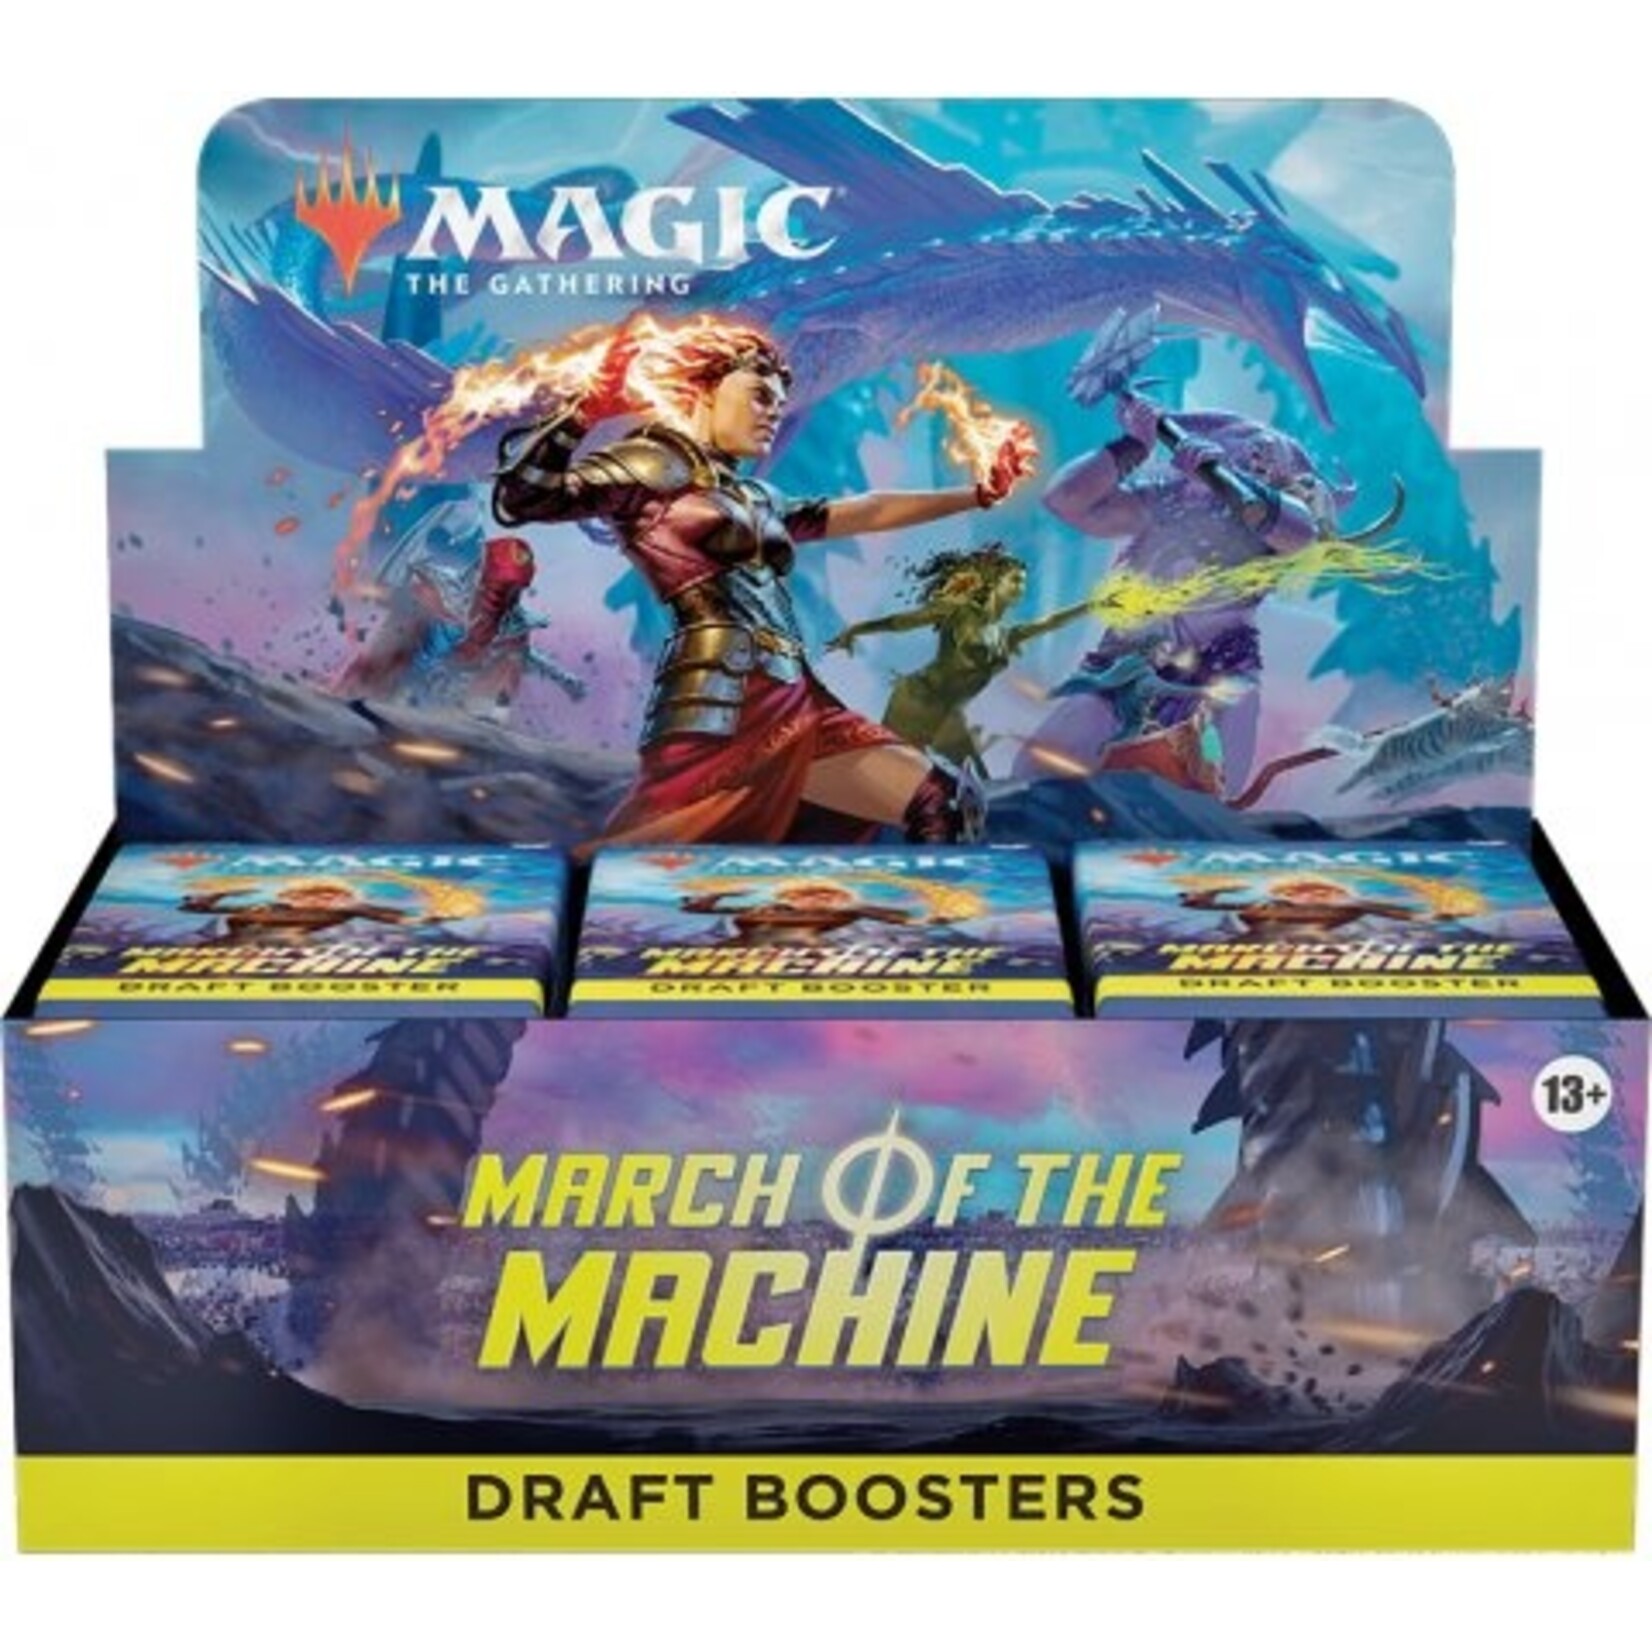 Magic the gathering March of the machine: Draft box